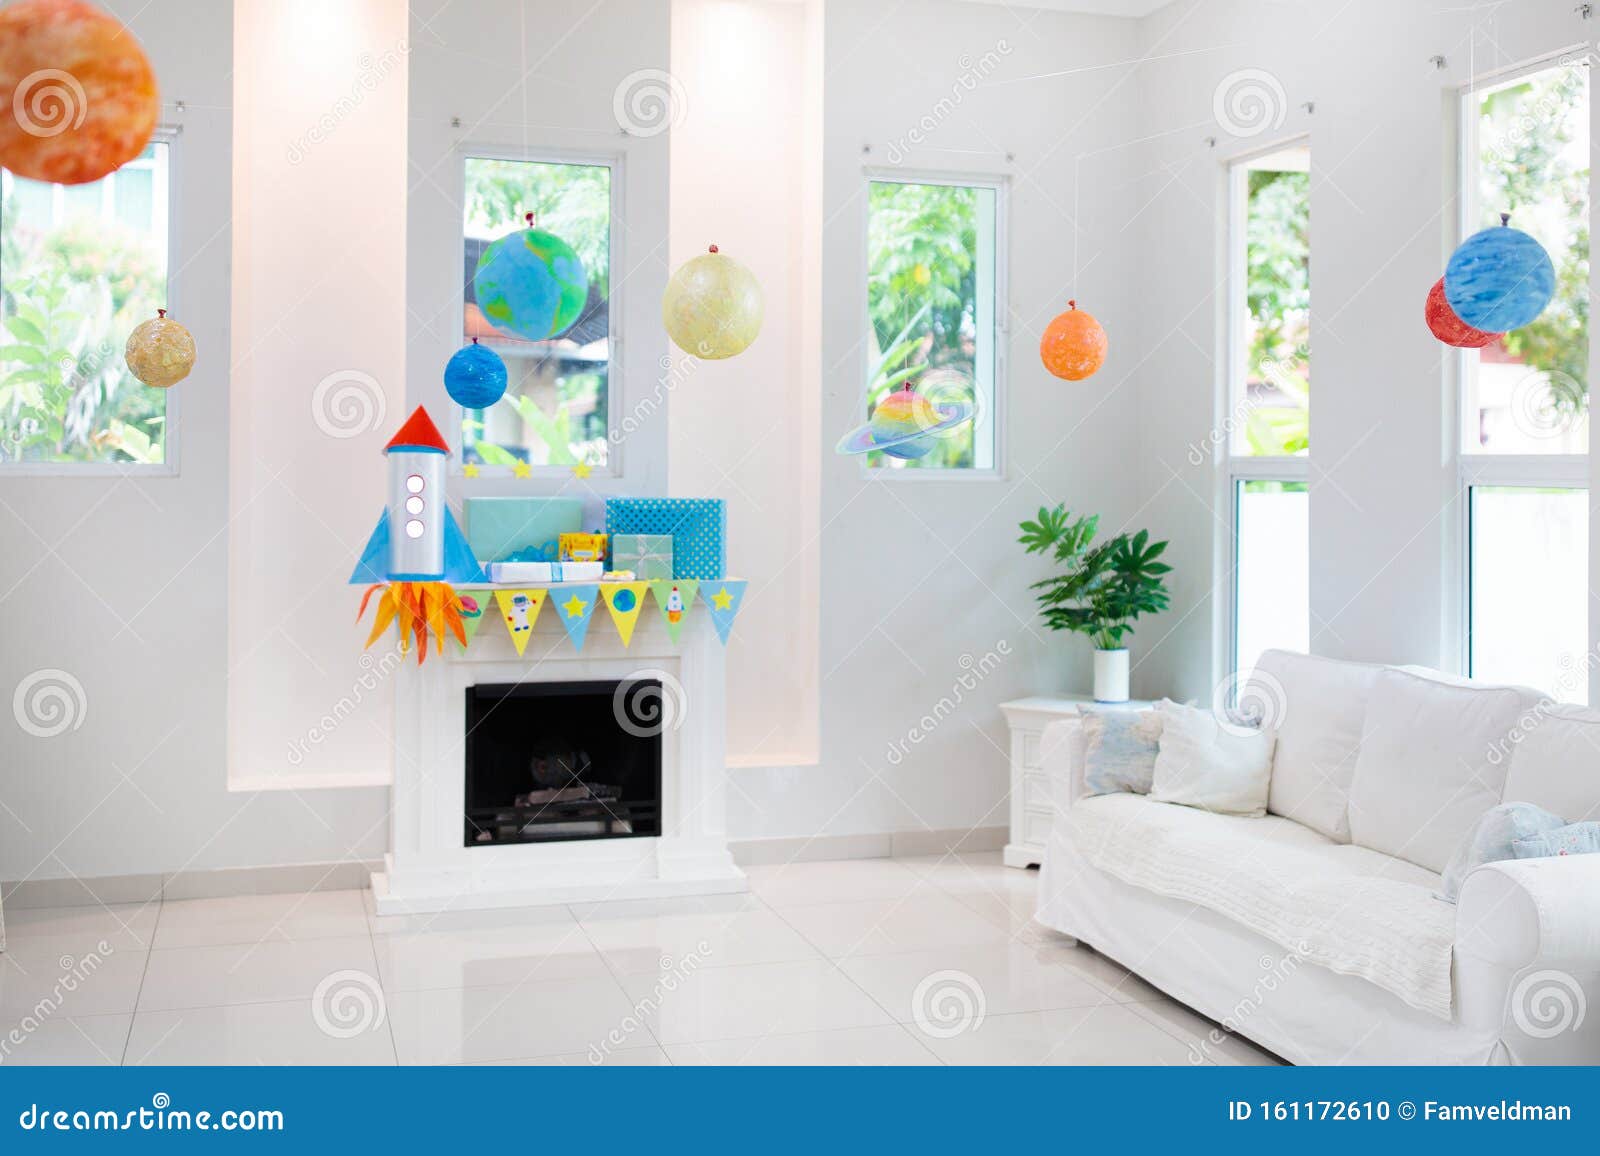 Space Theme Kids Birthday Party. Room Decoration Stock Photo ...